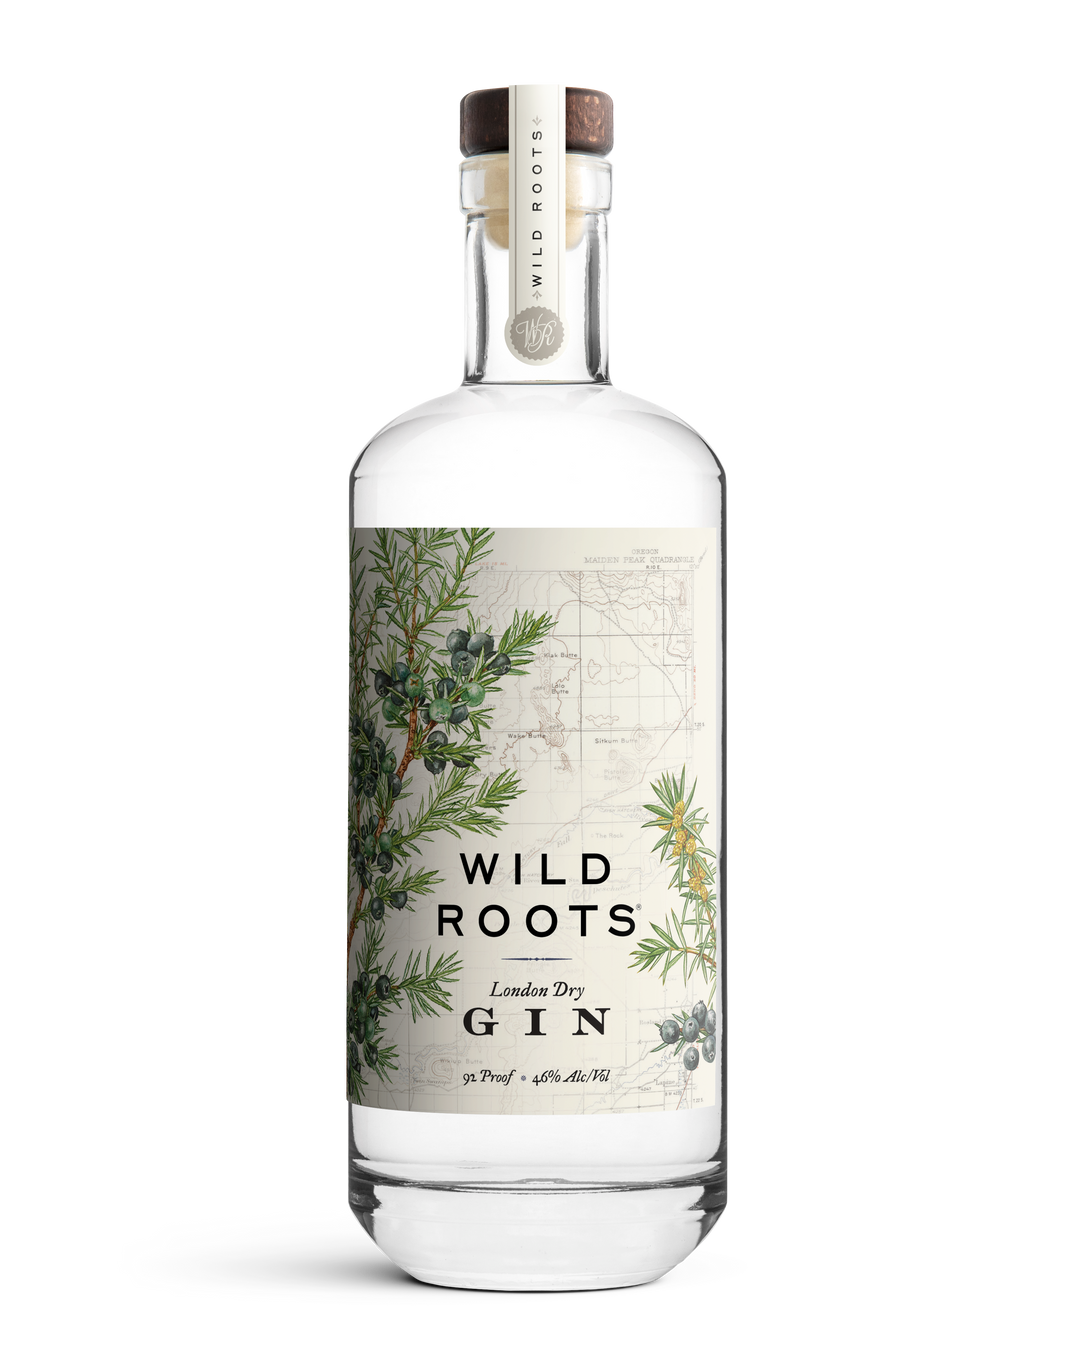 Buy Wild Roots London Dry Gin Online -Craft City